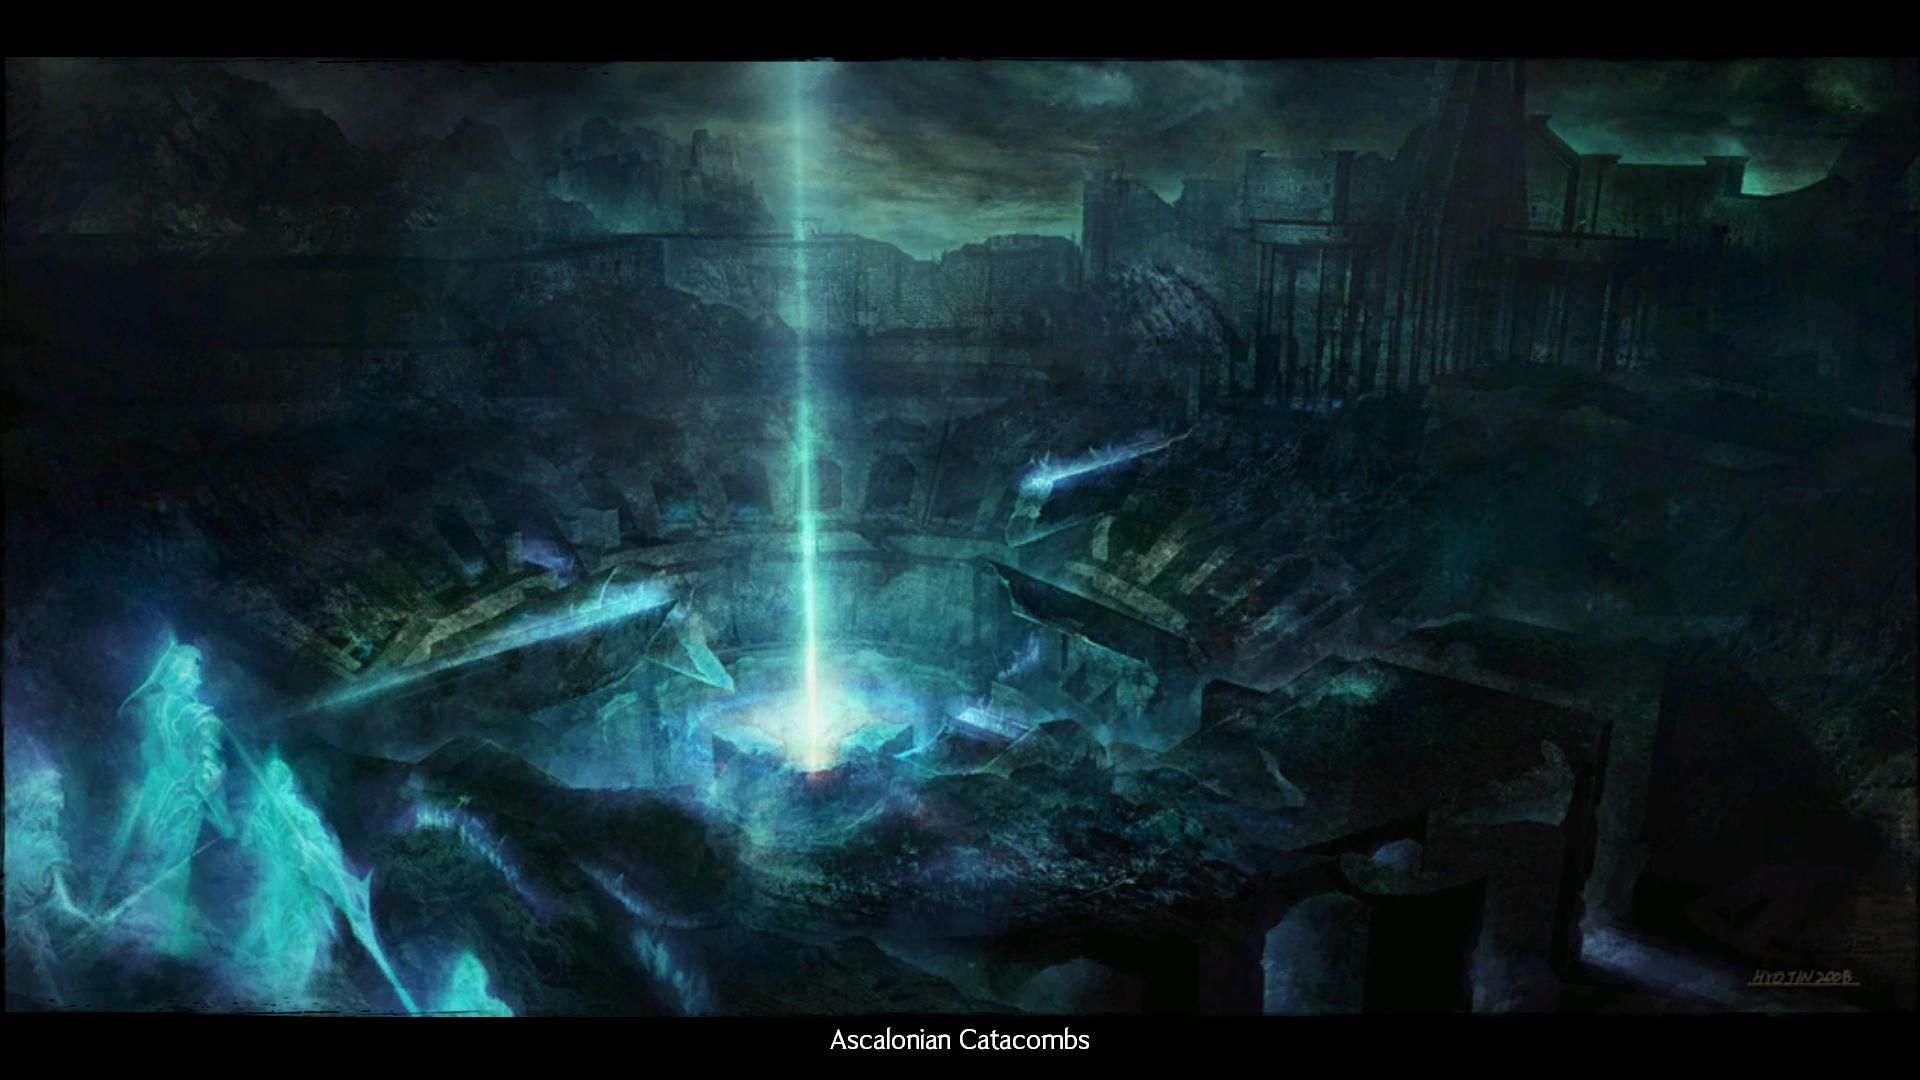 fantasy-mmorpg-mmo-games-guild-wars-2-ascalonian-catacombs-dungeon-story-mode-screenshot-intro